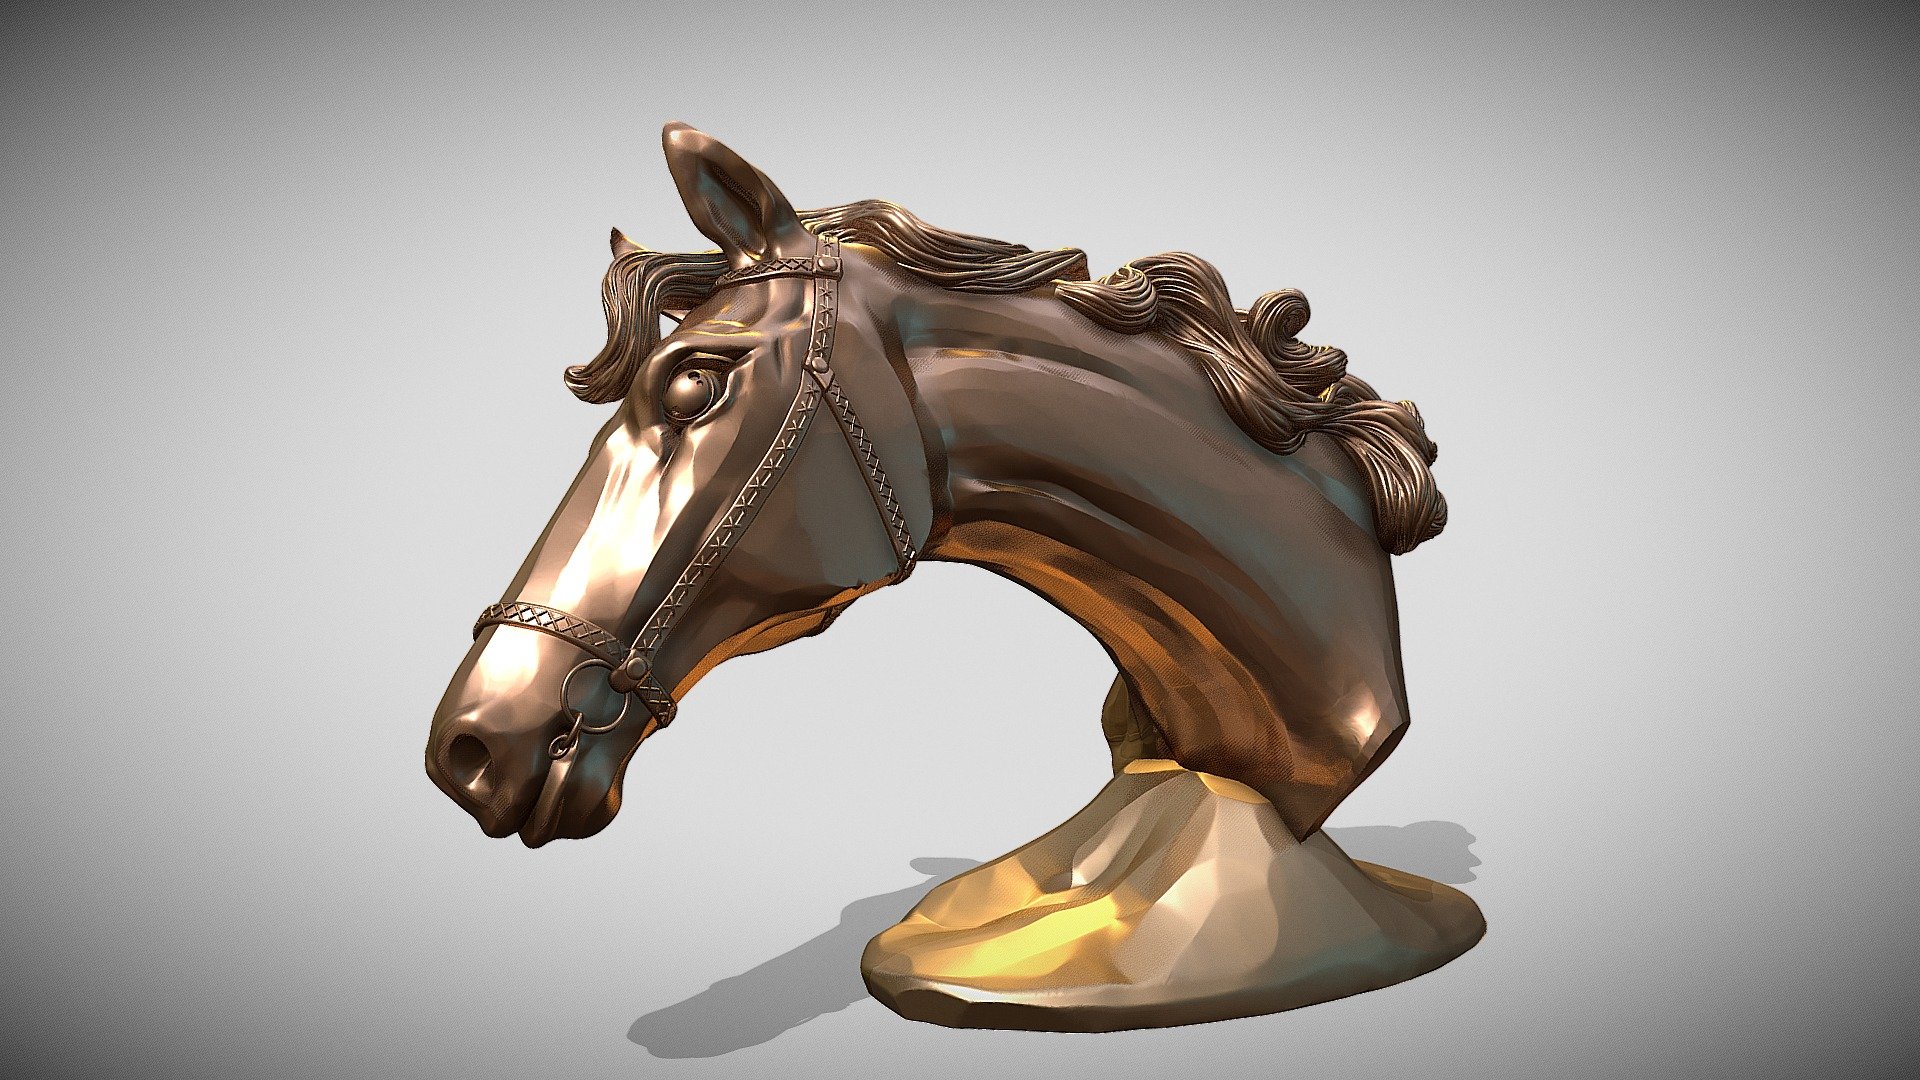 printable horse bust. It is divided into two parts - the horse's head itself and the base - stand 3d model